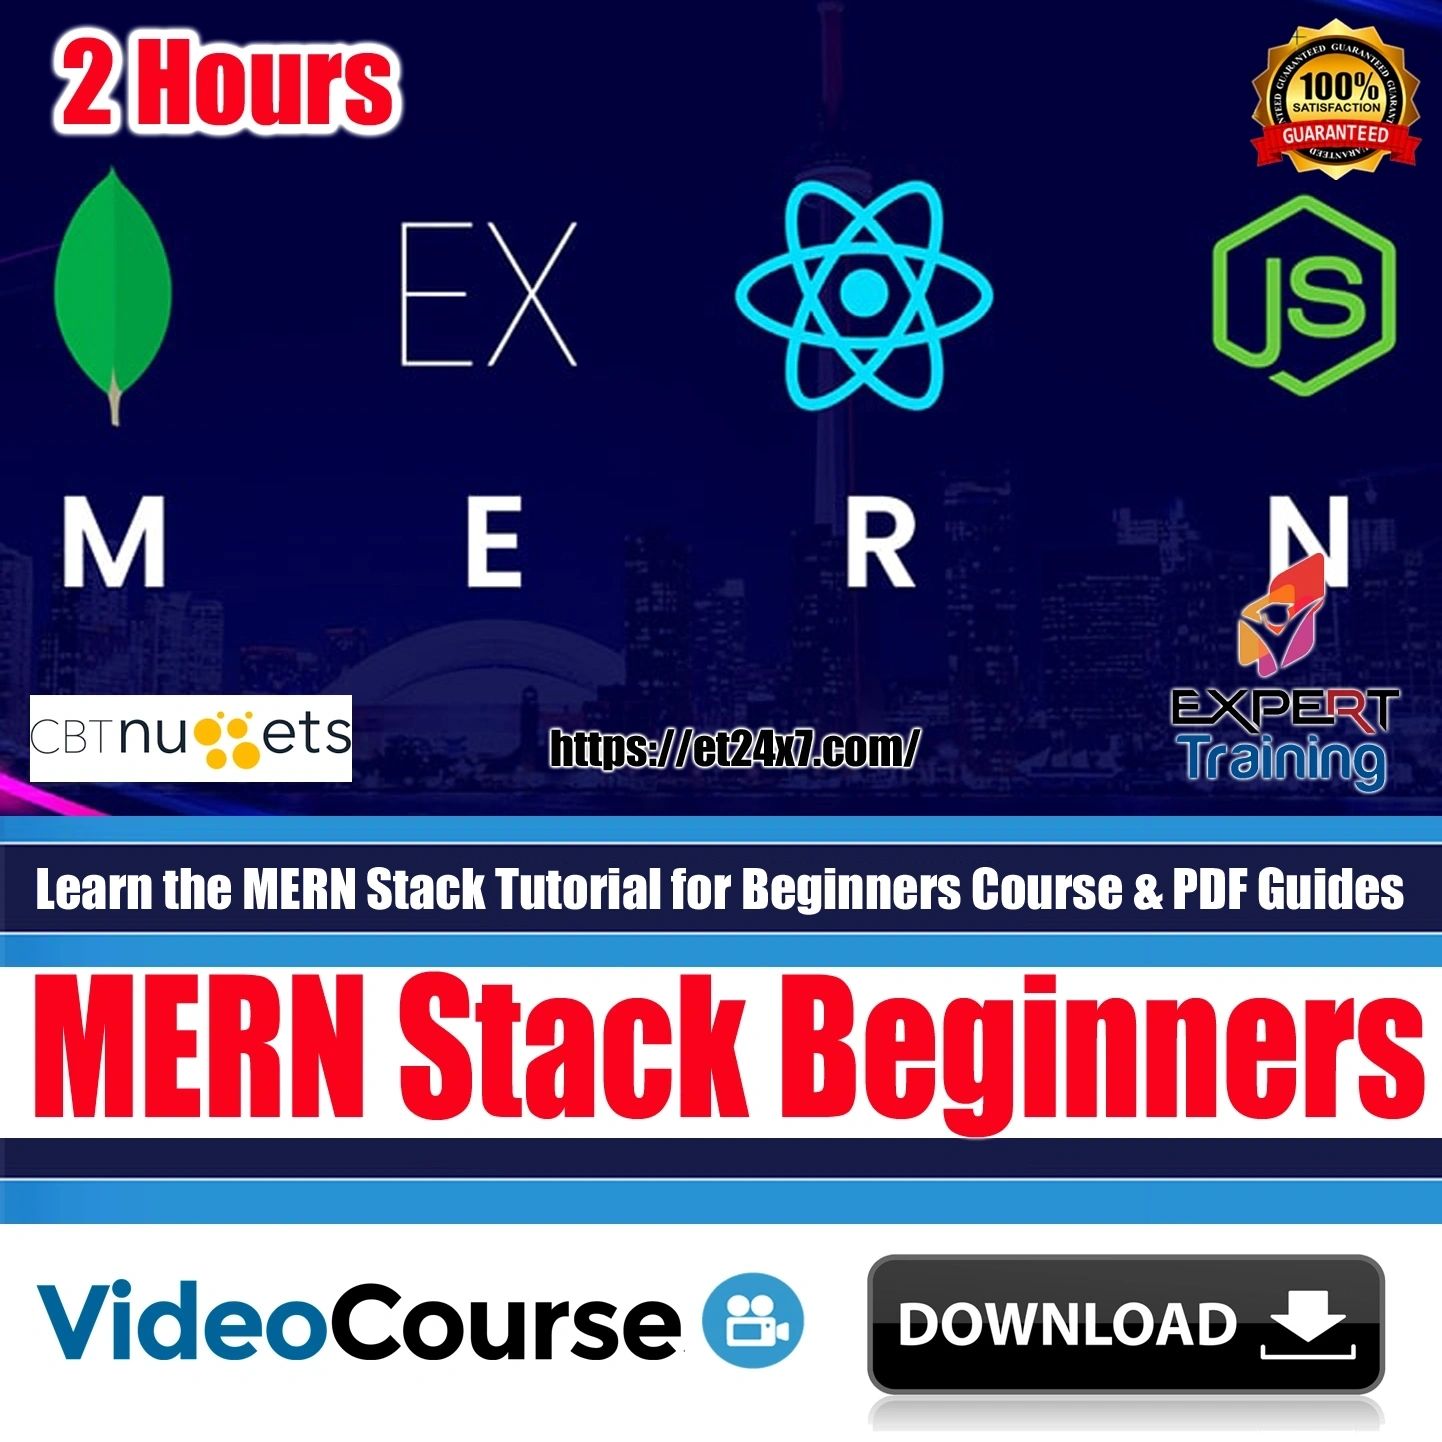 Learn the MERN Stack Tutorial for Beginners Course & PDF Guides